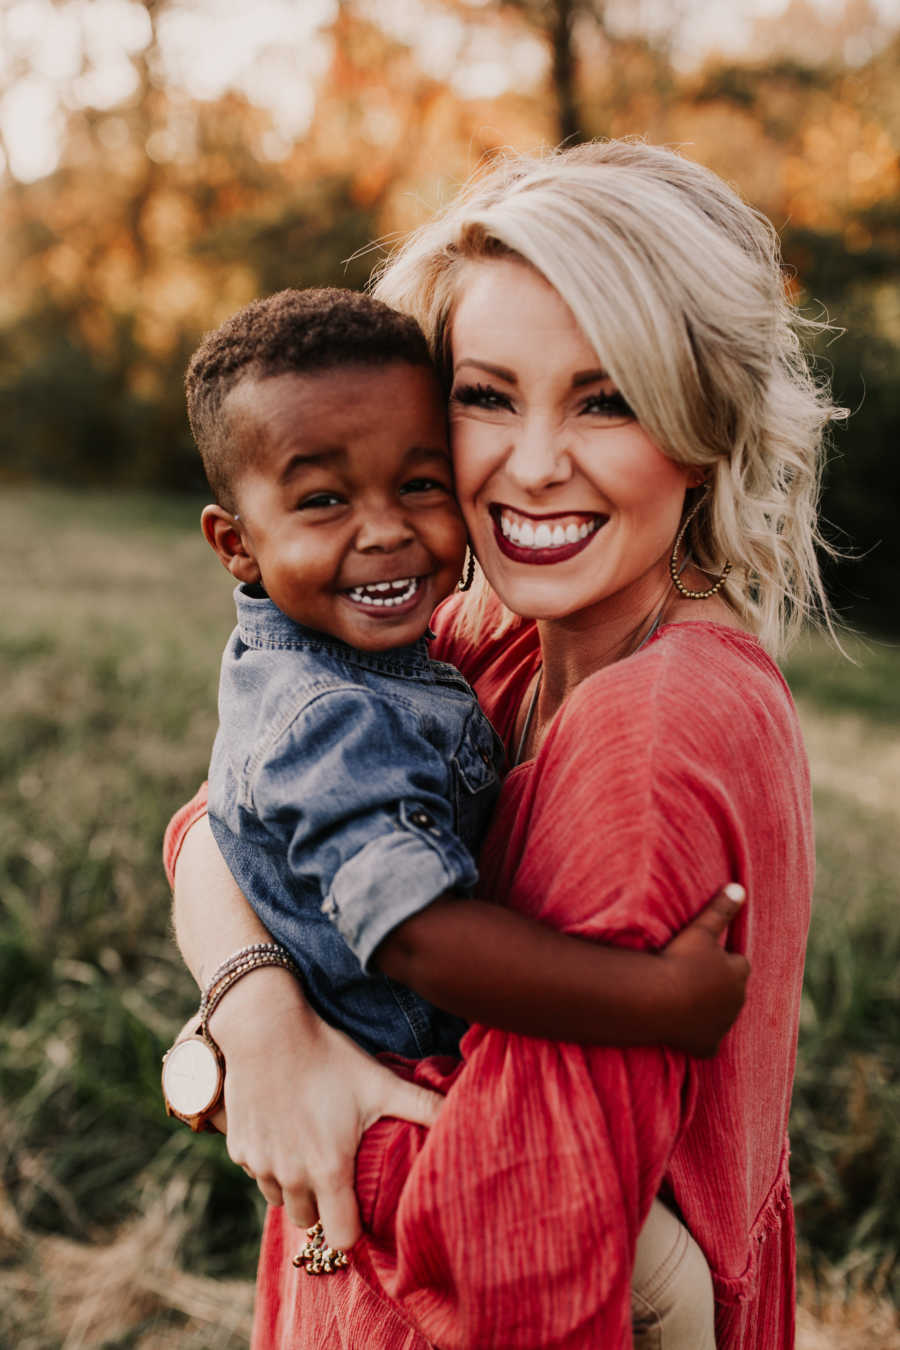 Woman smiles as she holds adopted son who is a different race than her